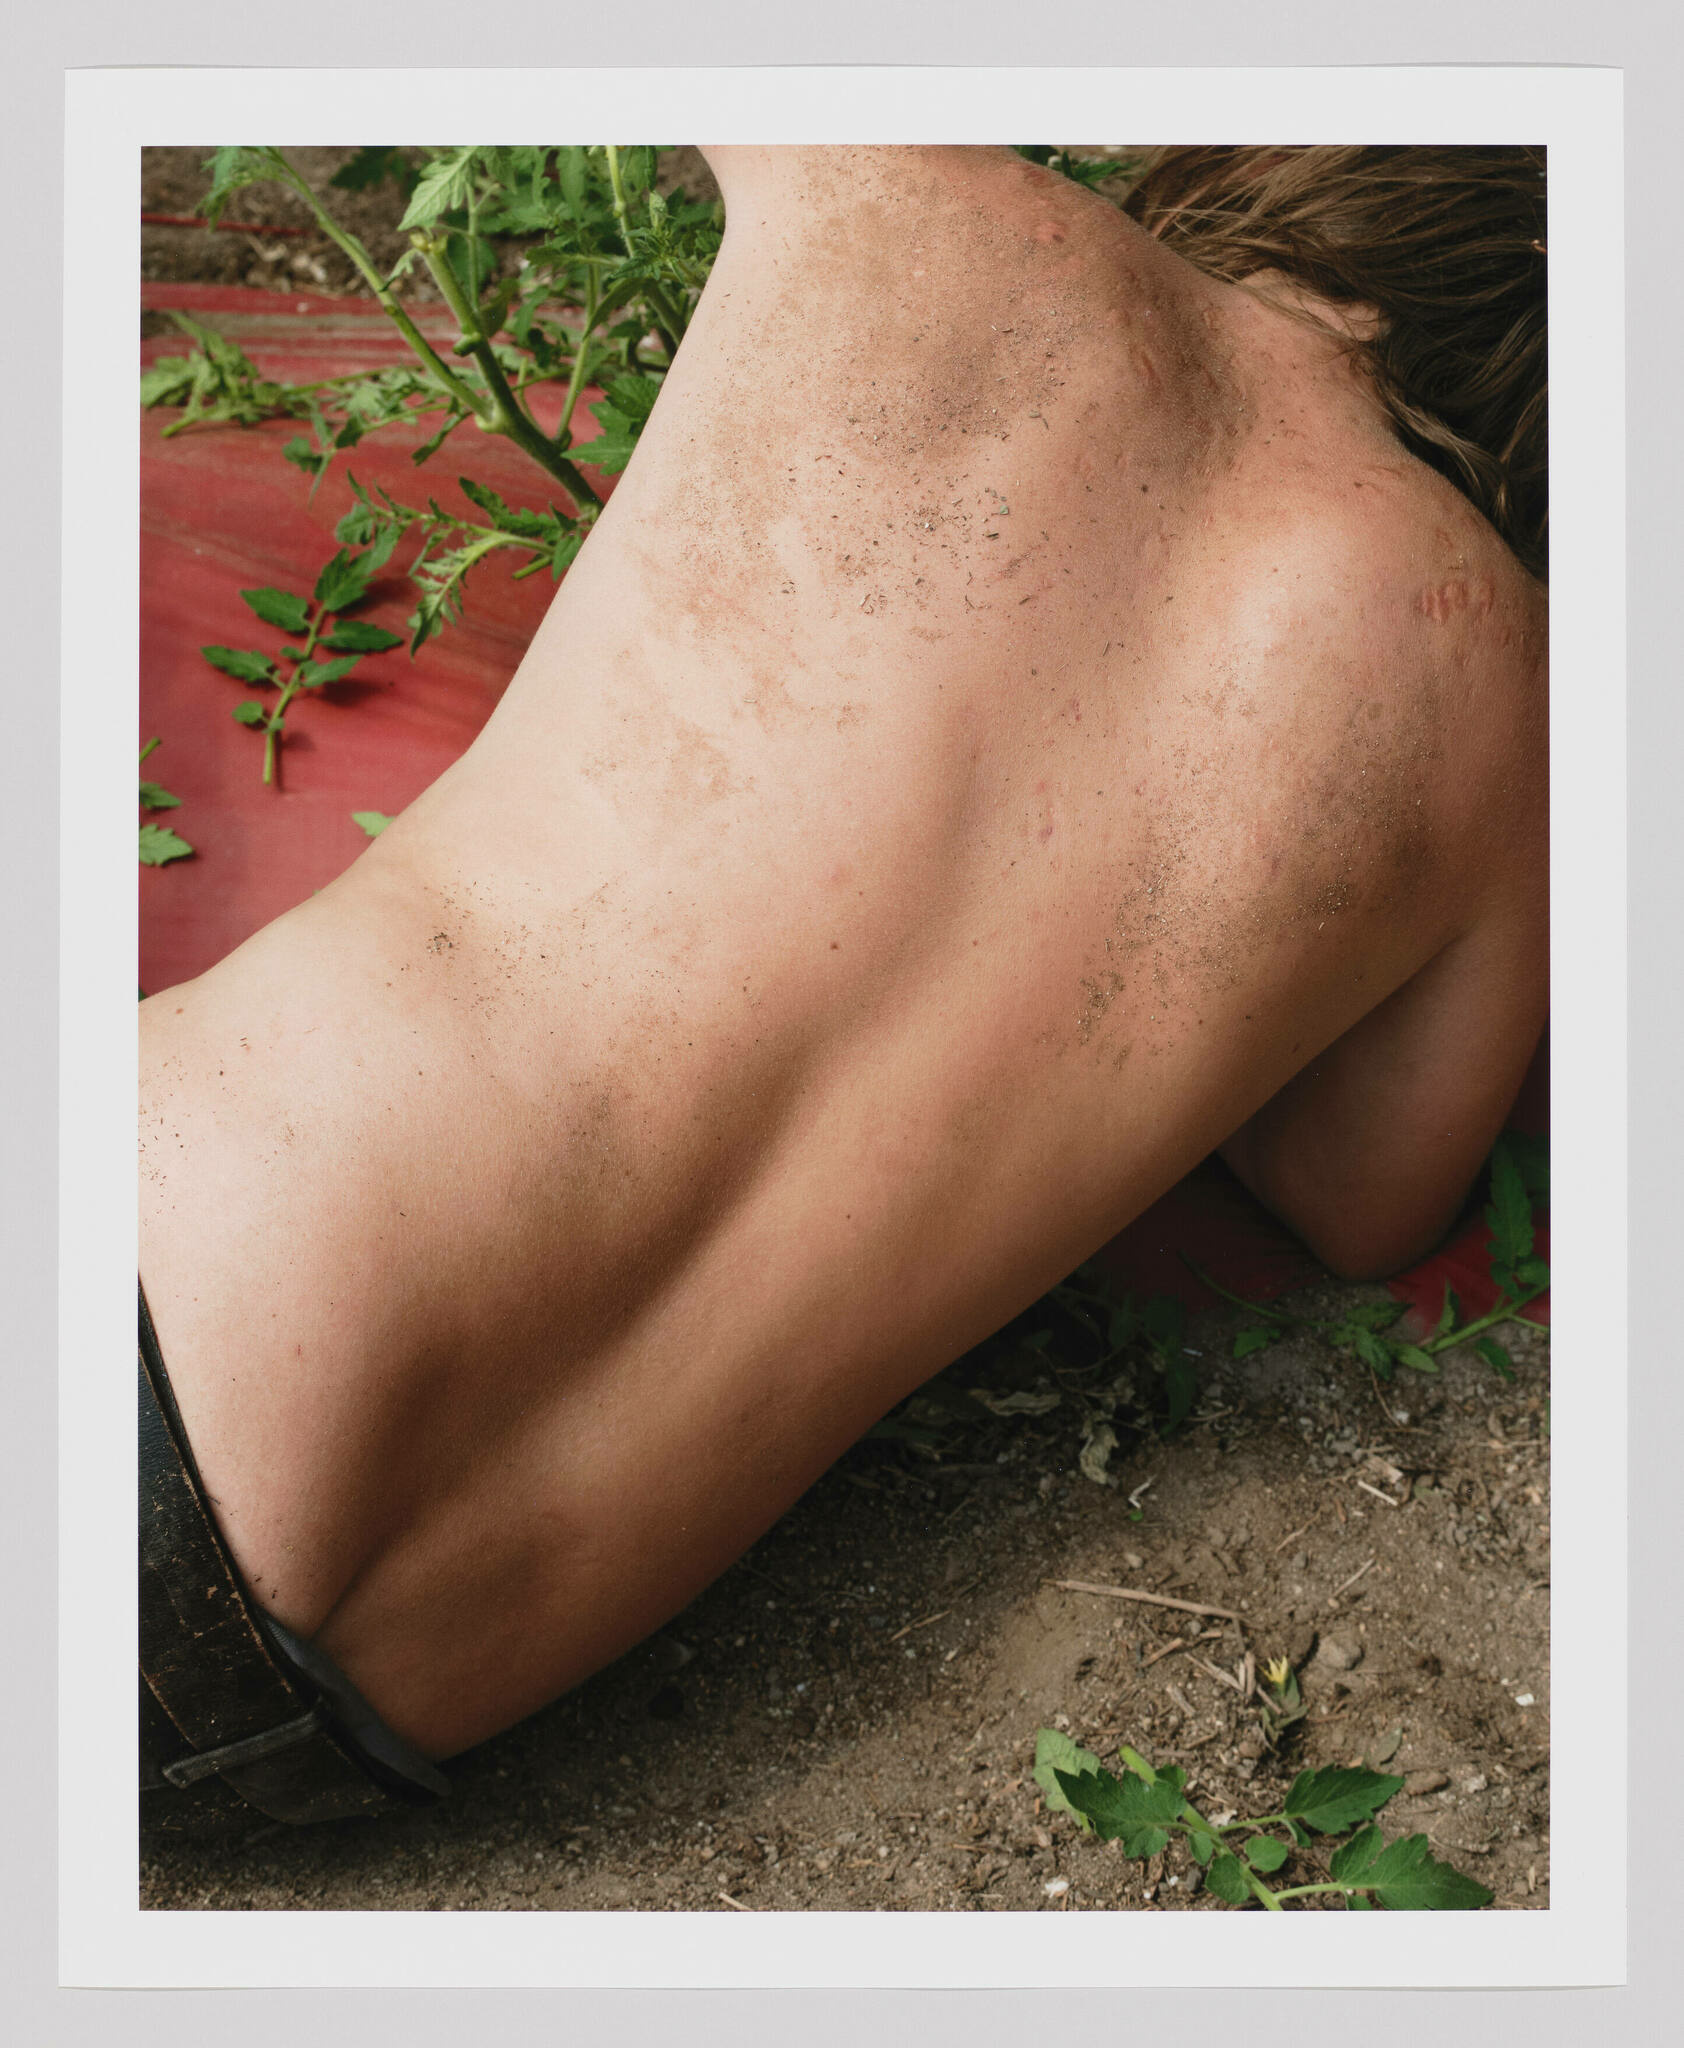 A dirty, bareback of a man, his head and legs out of frame, propping himself up from the ground with his right arm.